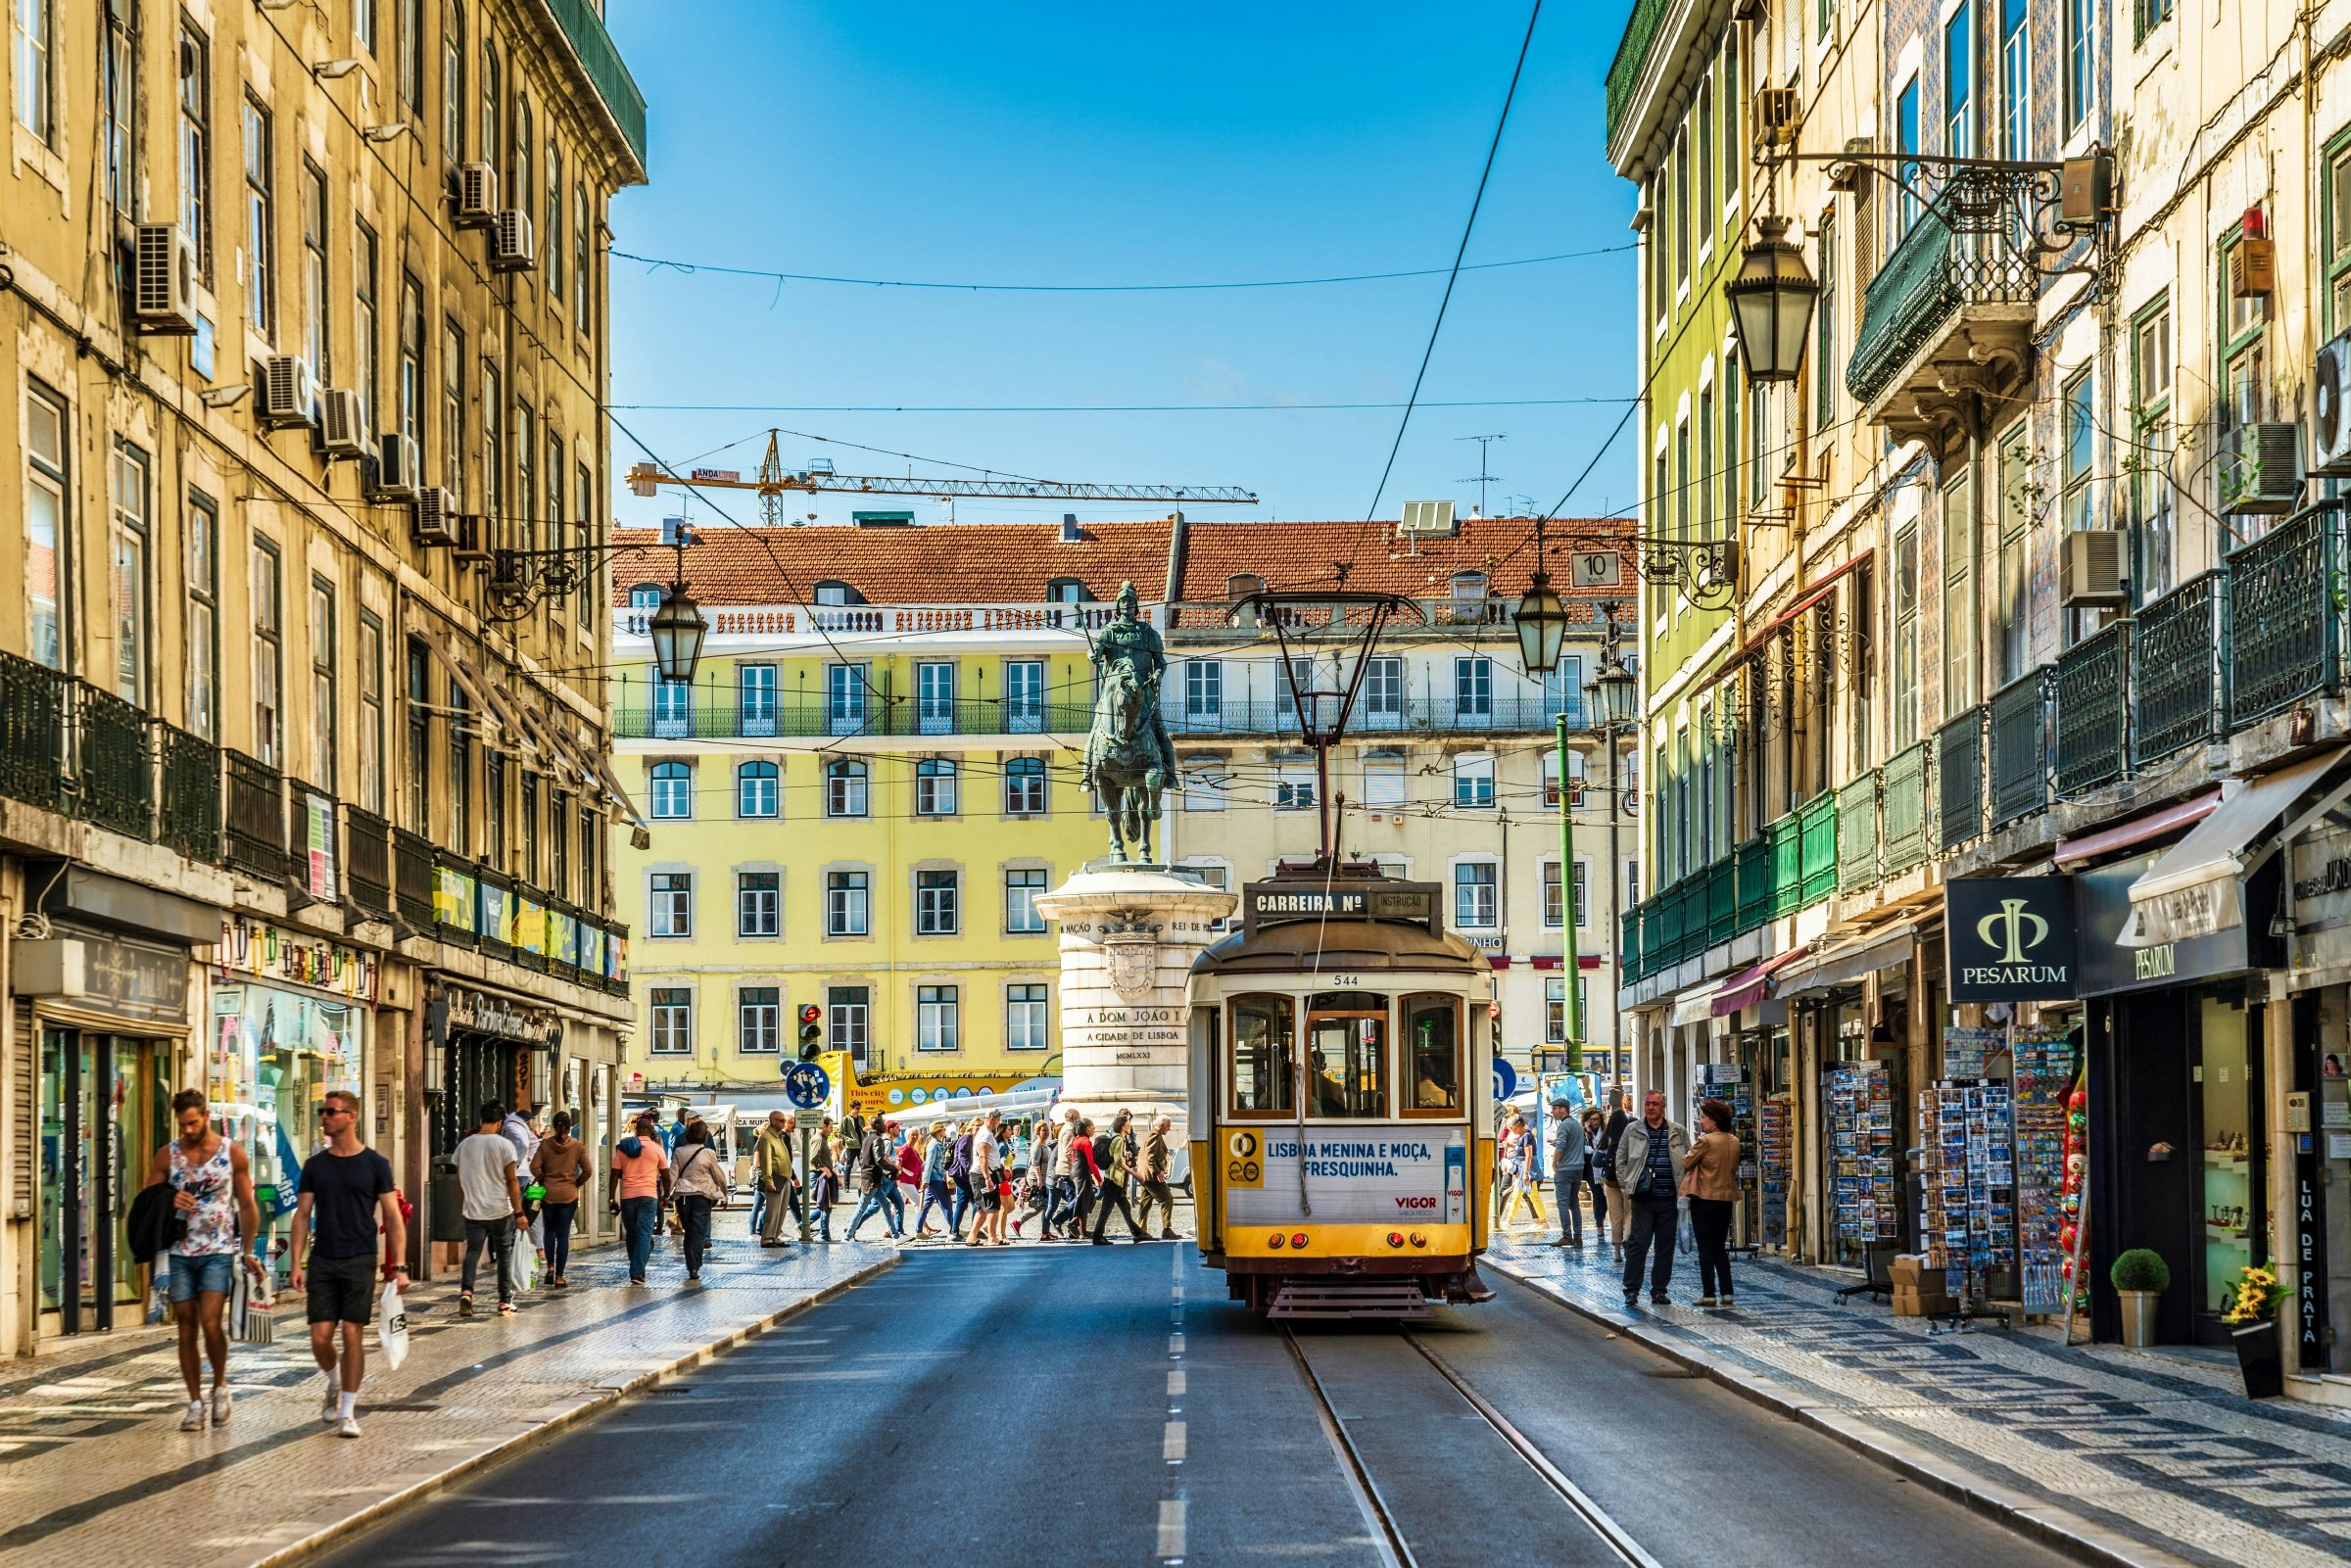 A yellow tram is travelling down a busy shopping street in Lisbon, Portugal, on a sunny day.